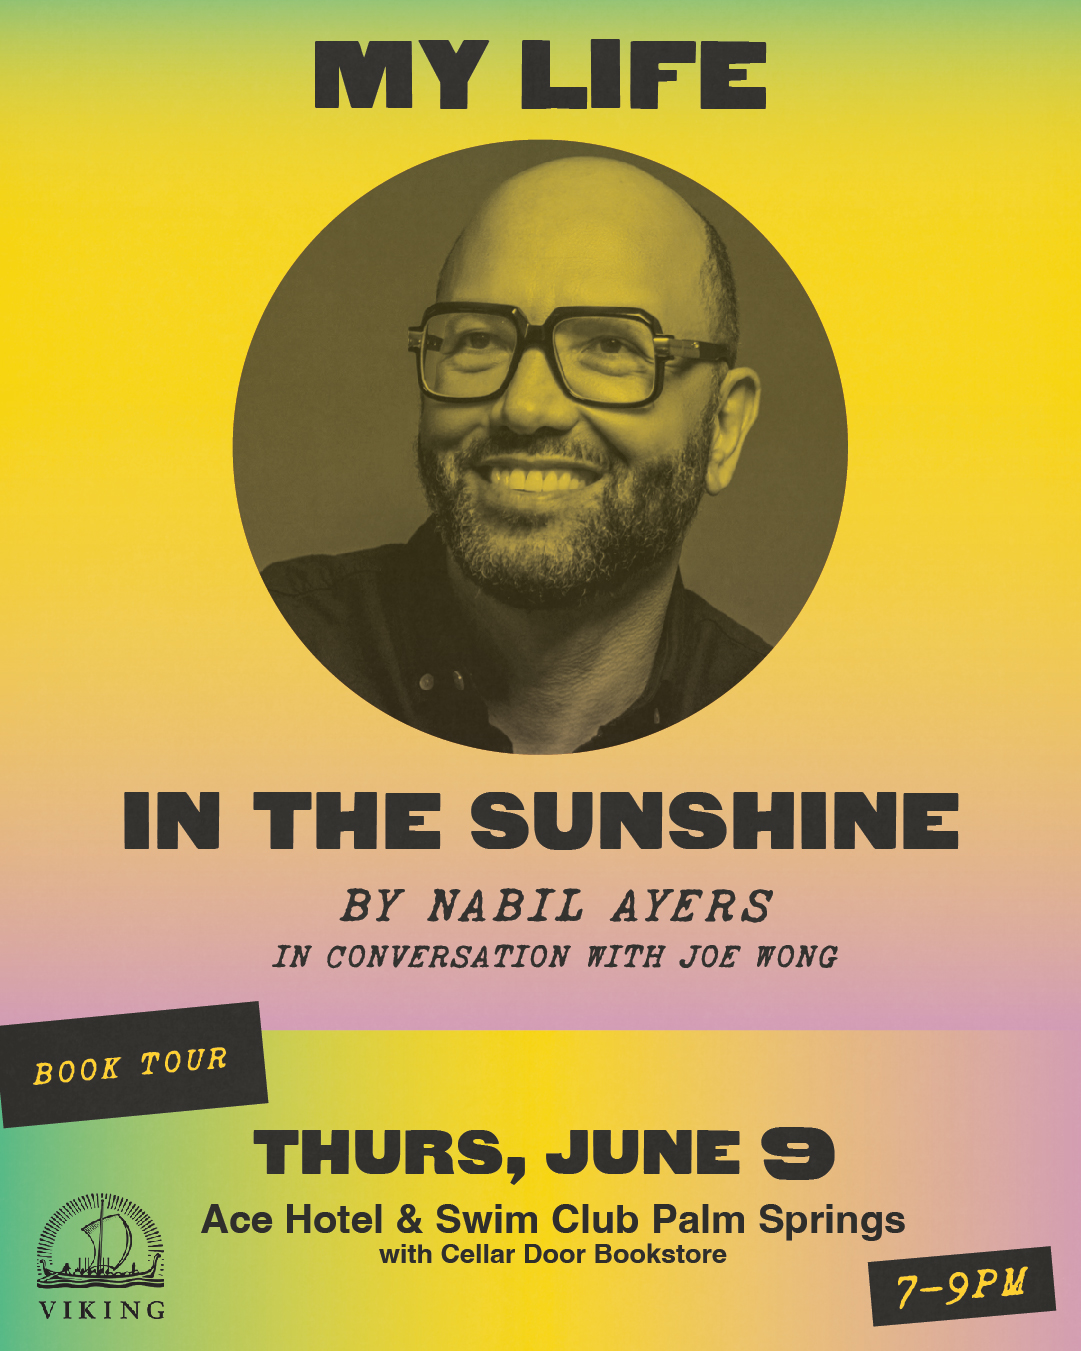 Nabil Ayers "My Life in the Sunshine" Book Tour promo